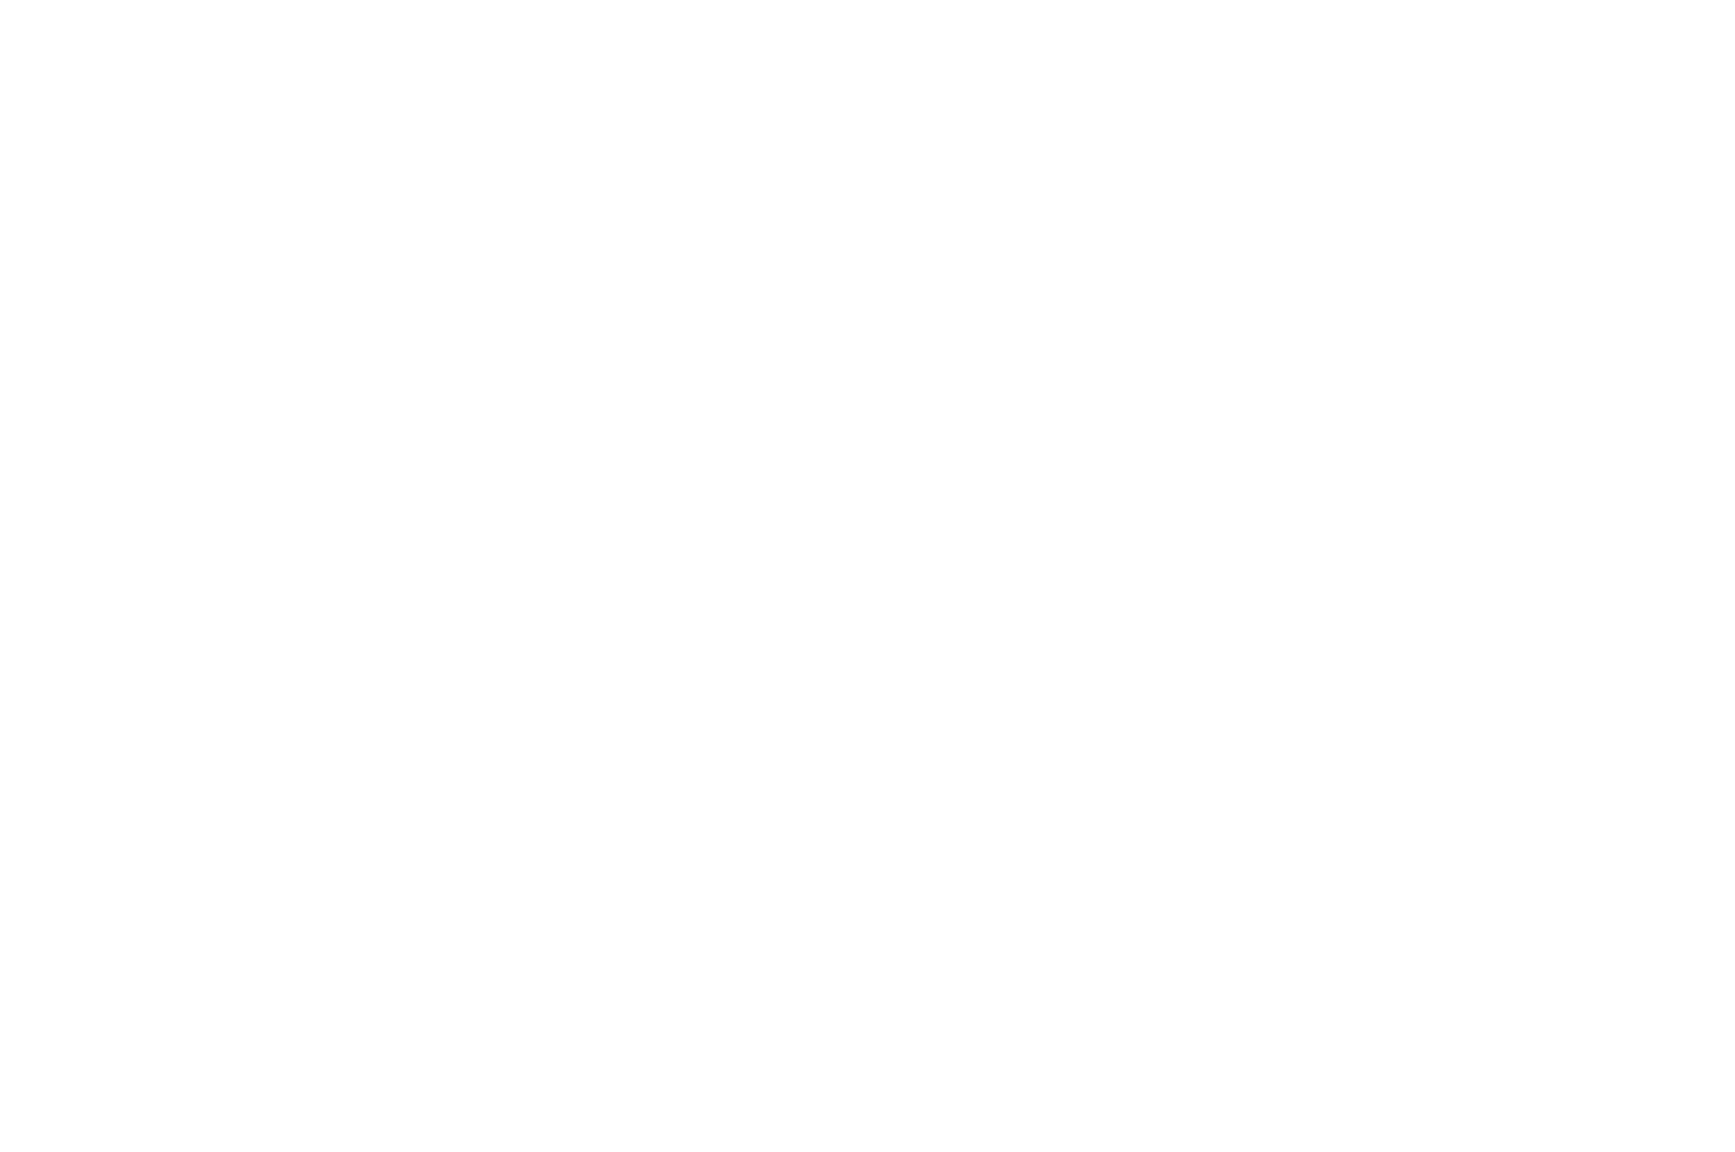 HONORABLE MENTION - INFLUX Film Awards - 2021